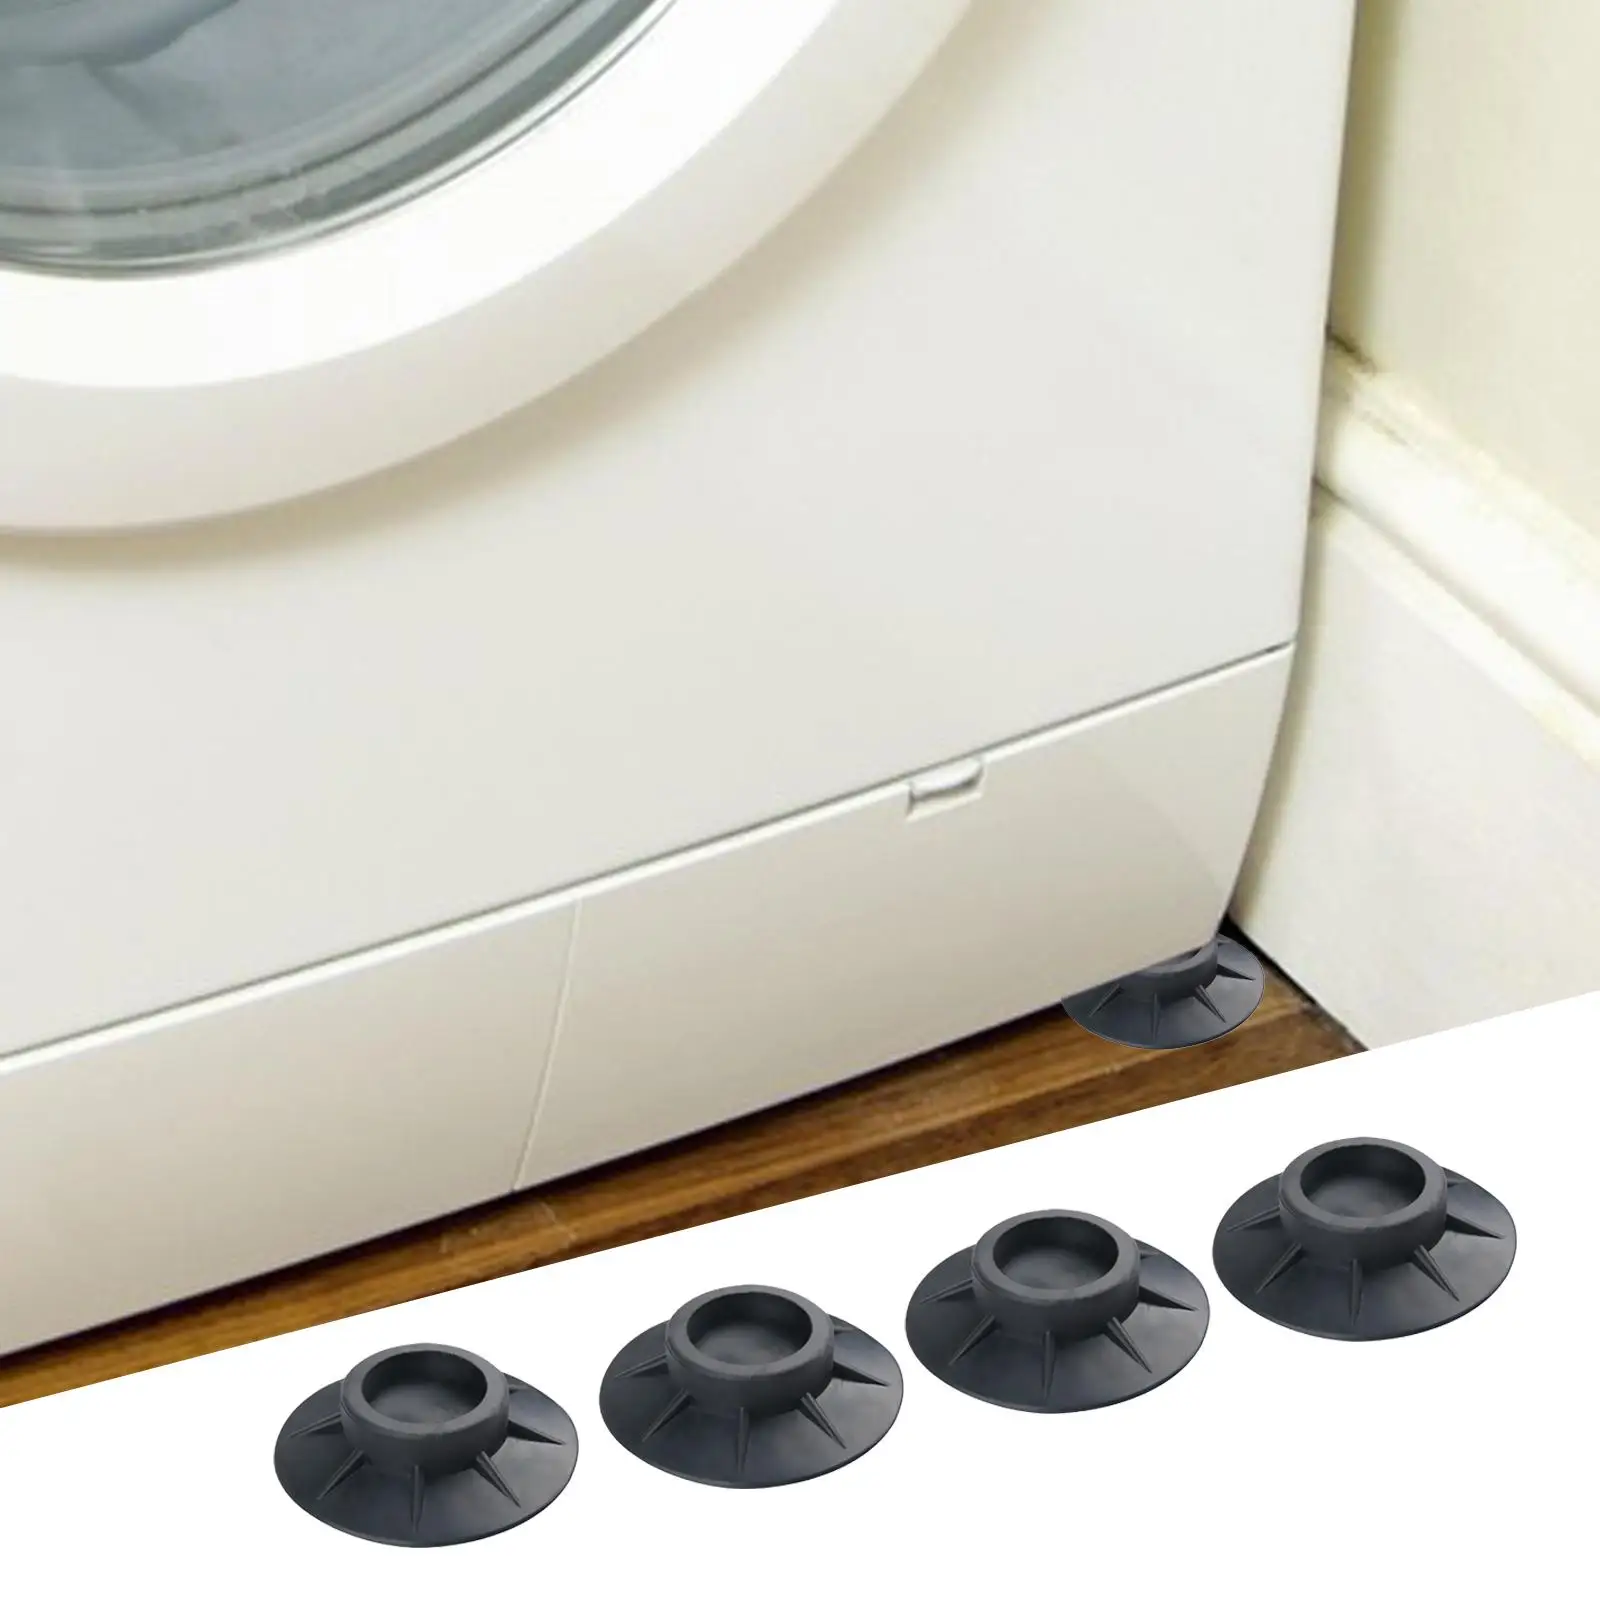 4 Pieces Dryer Pedestals Covers Slip Protects Laundry Room Floor Universal Rubber Slipstops Washing Machine Feet for Fridge